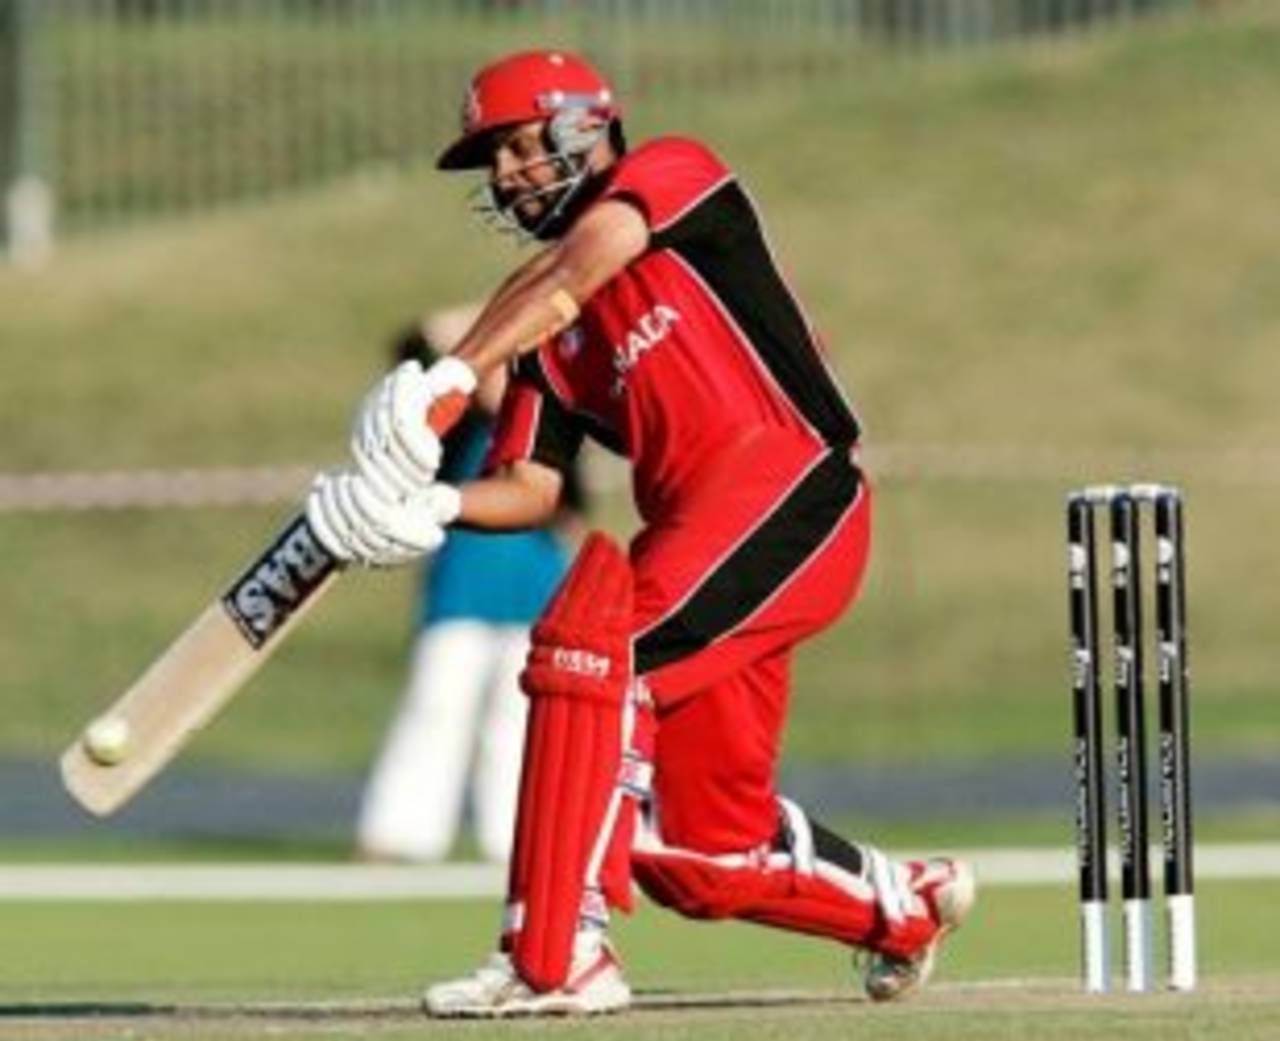 Canada's captain Ashish Bagai is set to cart the ball to midwicket, Afghanistan v Canada, ICC World Cup Qualifiers, Super Eights, Pretoria, April 13, 2009